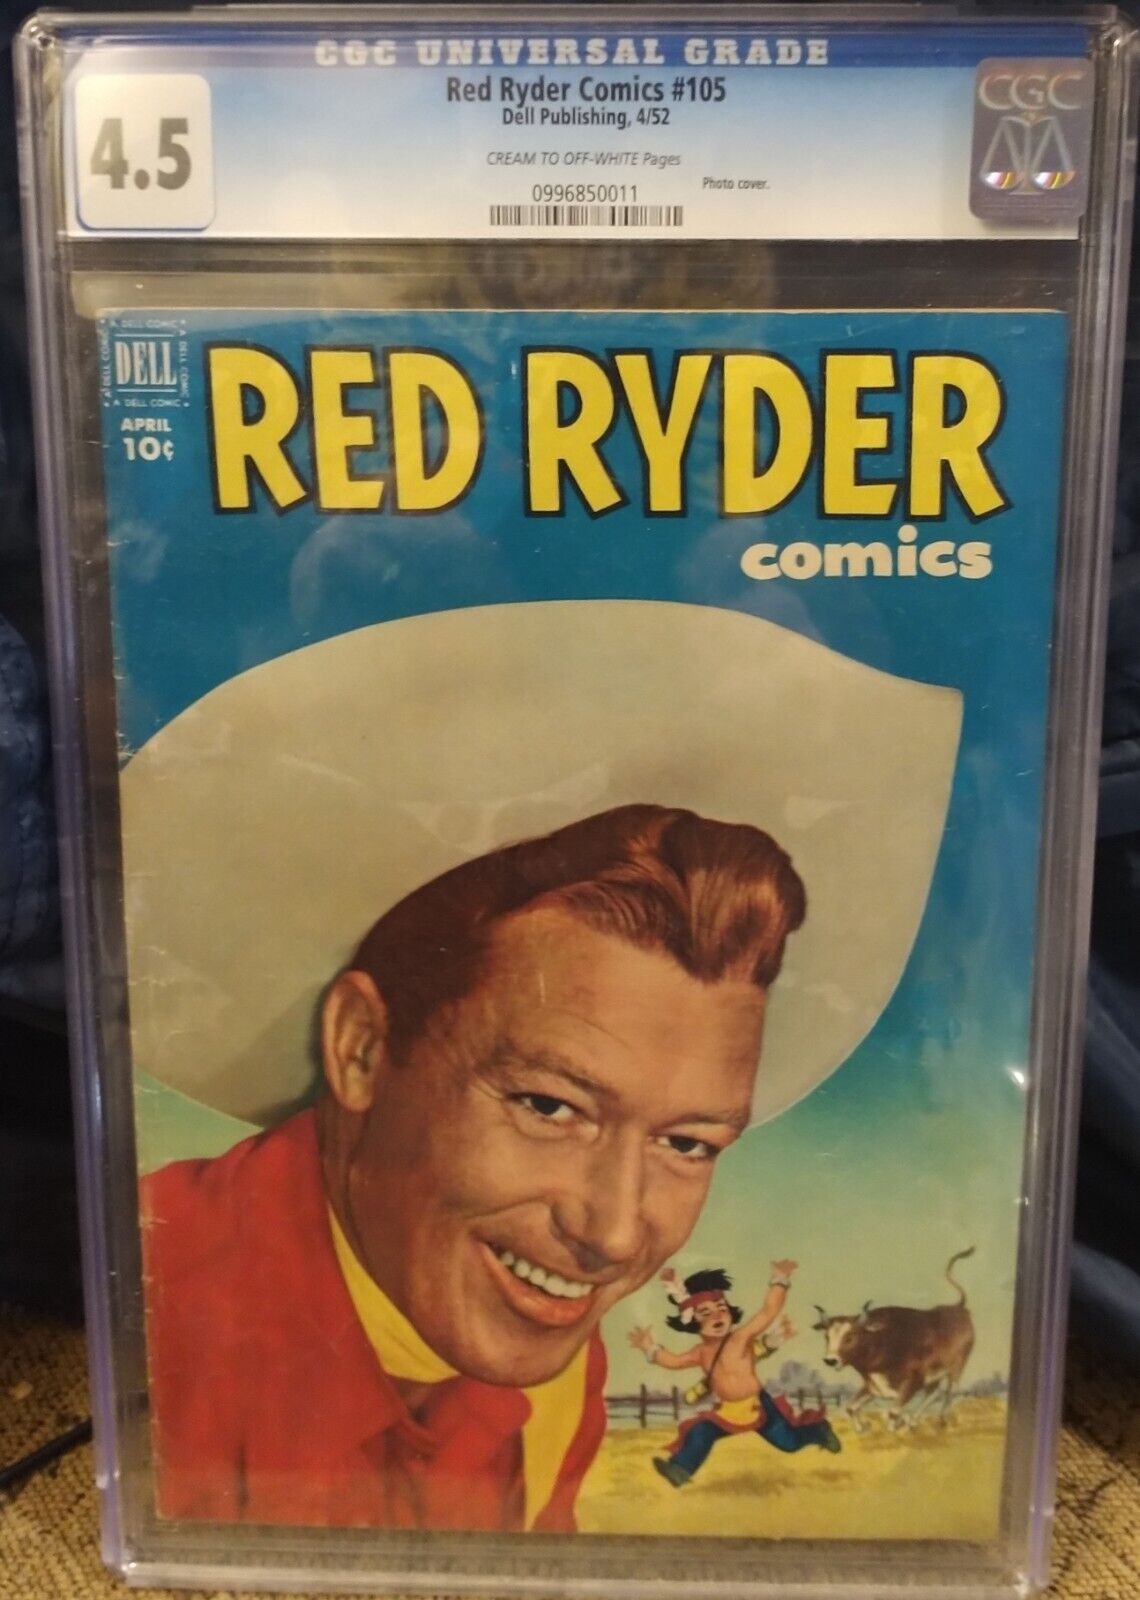 1952 'RED RYDER' DELL COMIC #105 CGC 4.5 CTOWP LITTLE BEAVER ON COVER GOLDEN AGE